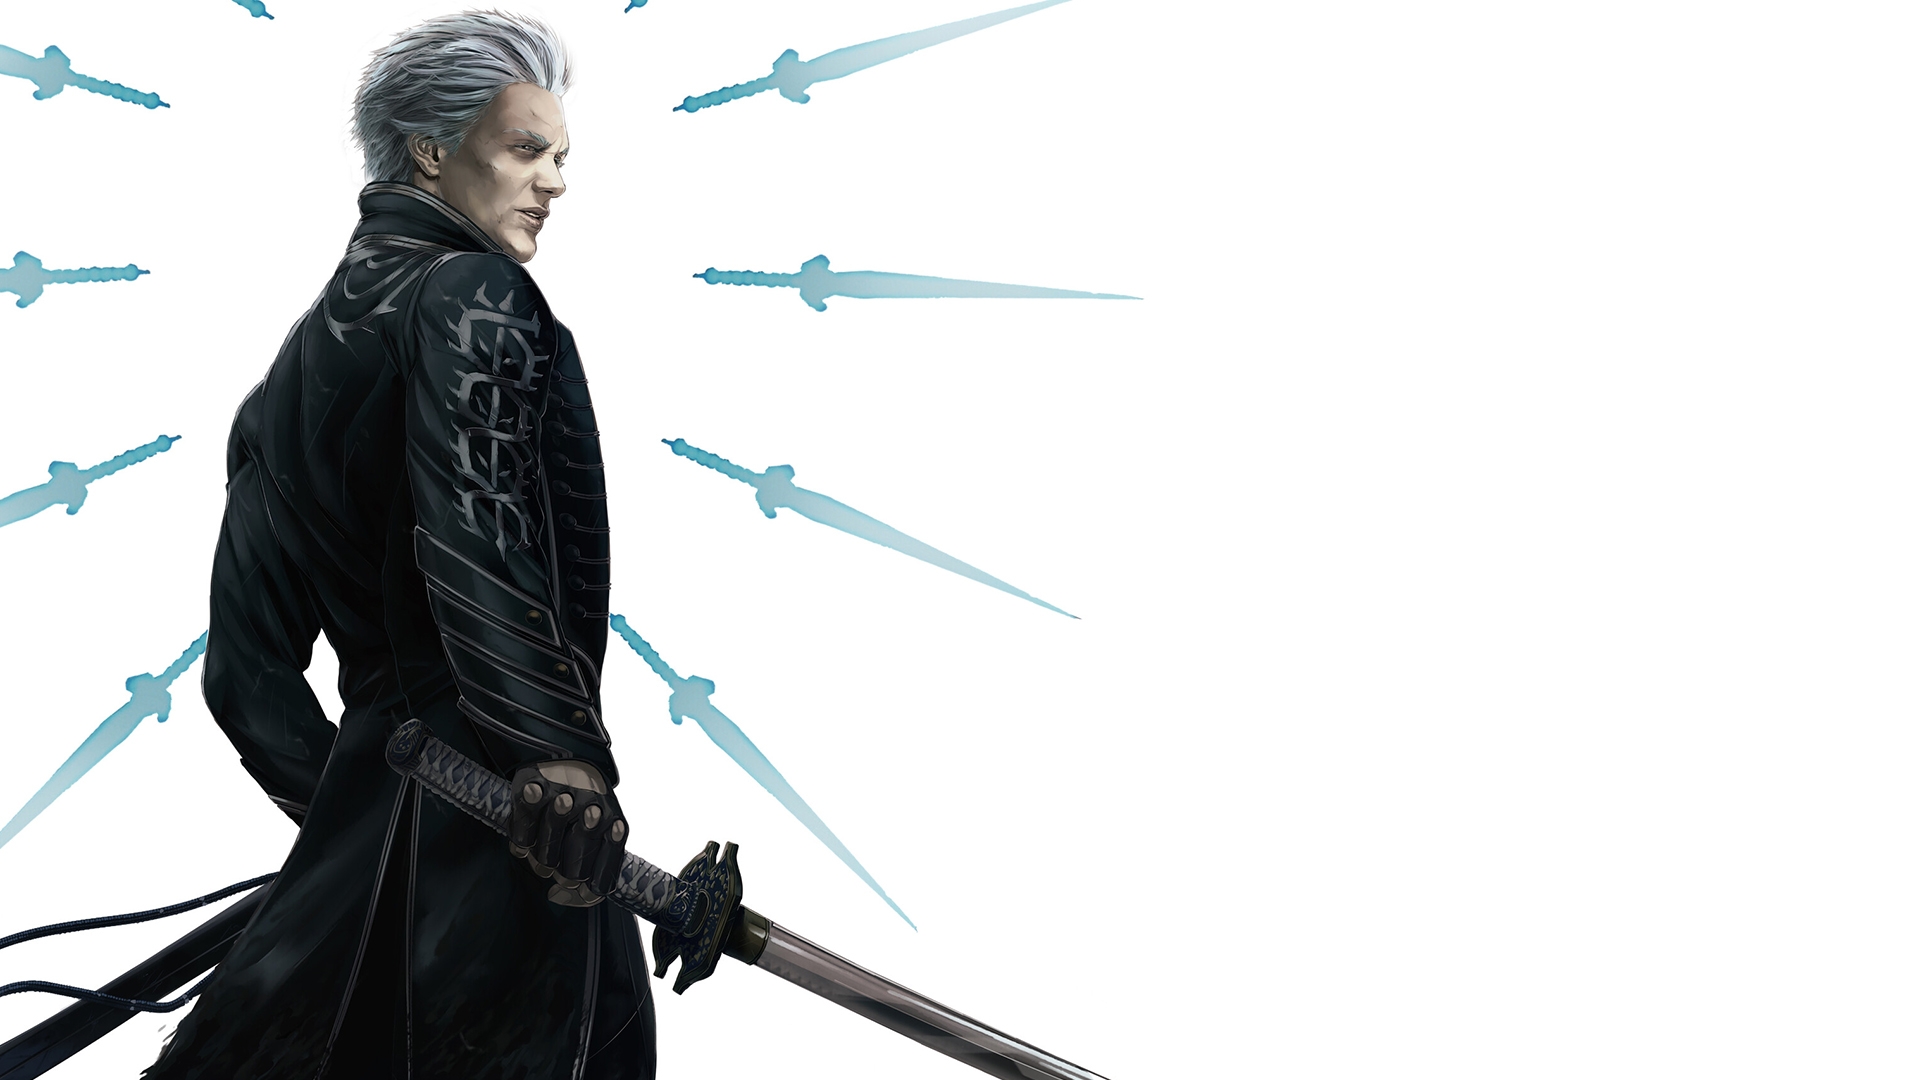 Wallpaper vergil devil may cry 5 sword - free pictures on Fonwall